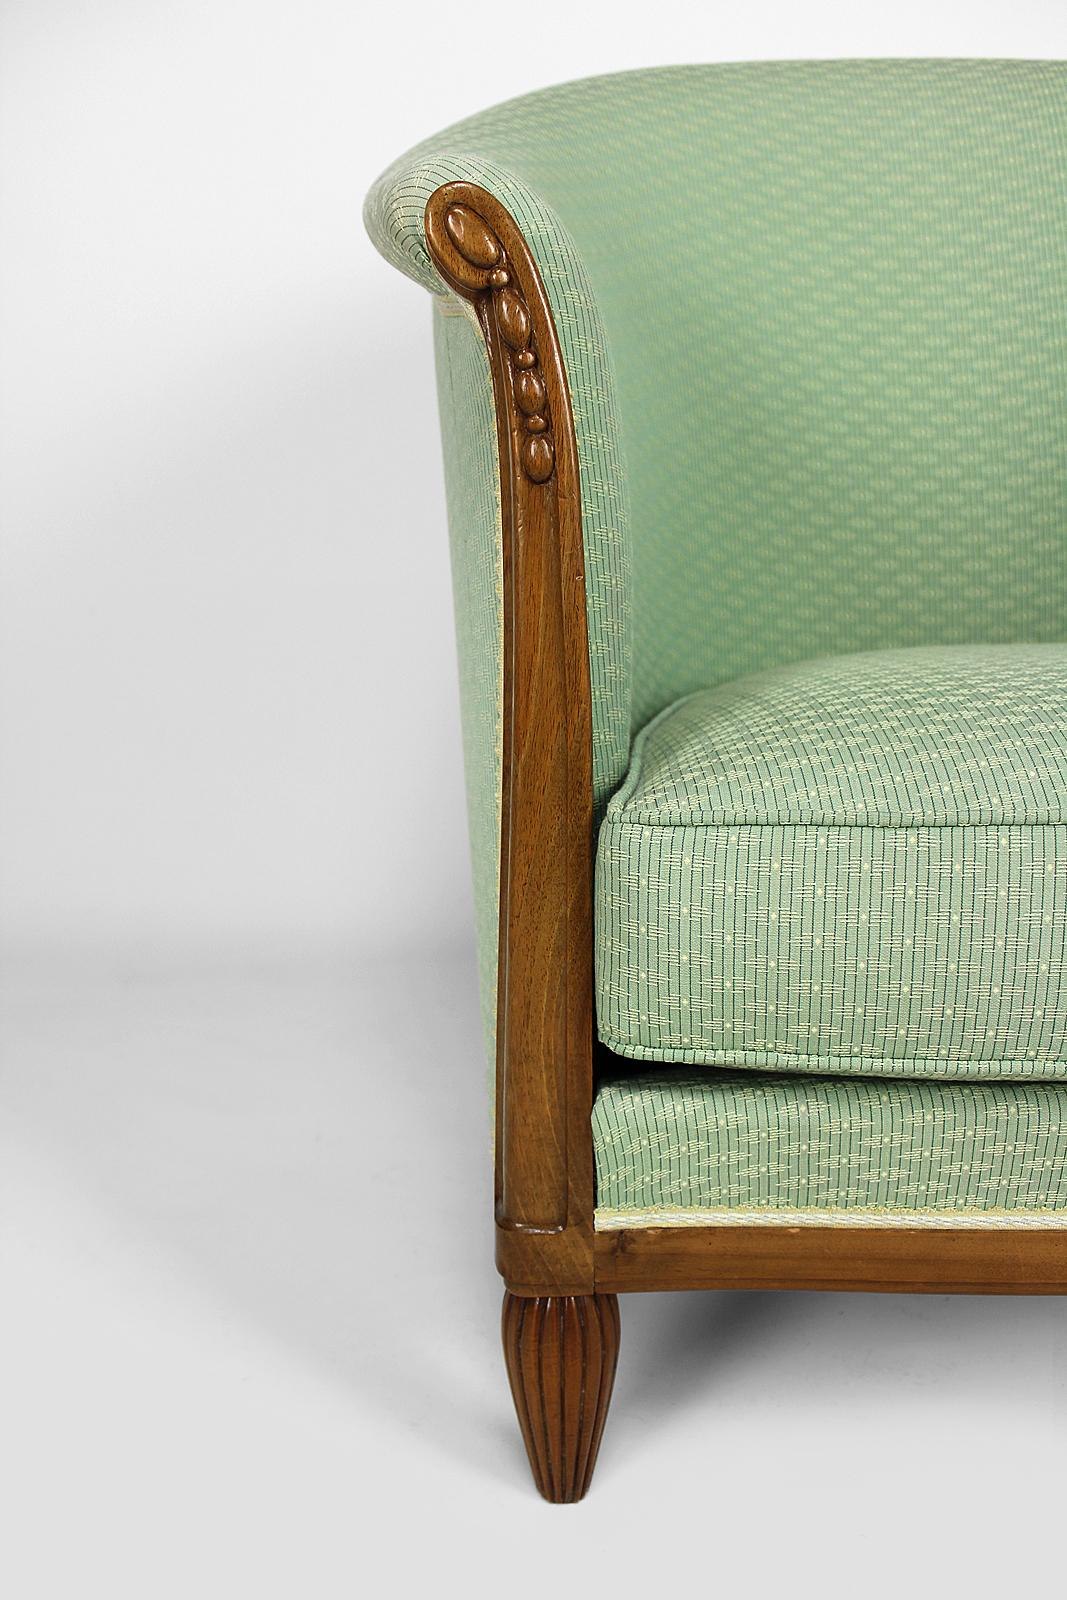 Art Deco Armchair by Ateliers Gauthier-Poinsignon in walnut, circa 1920-1930 For Sale 5